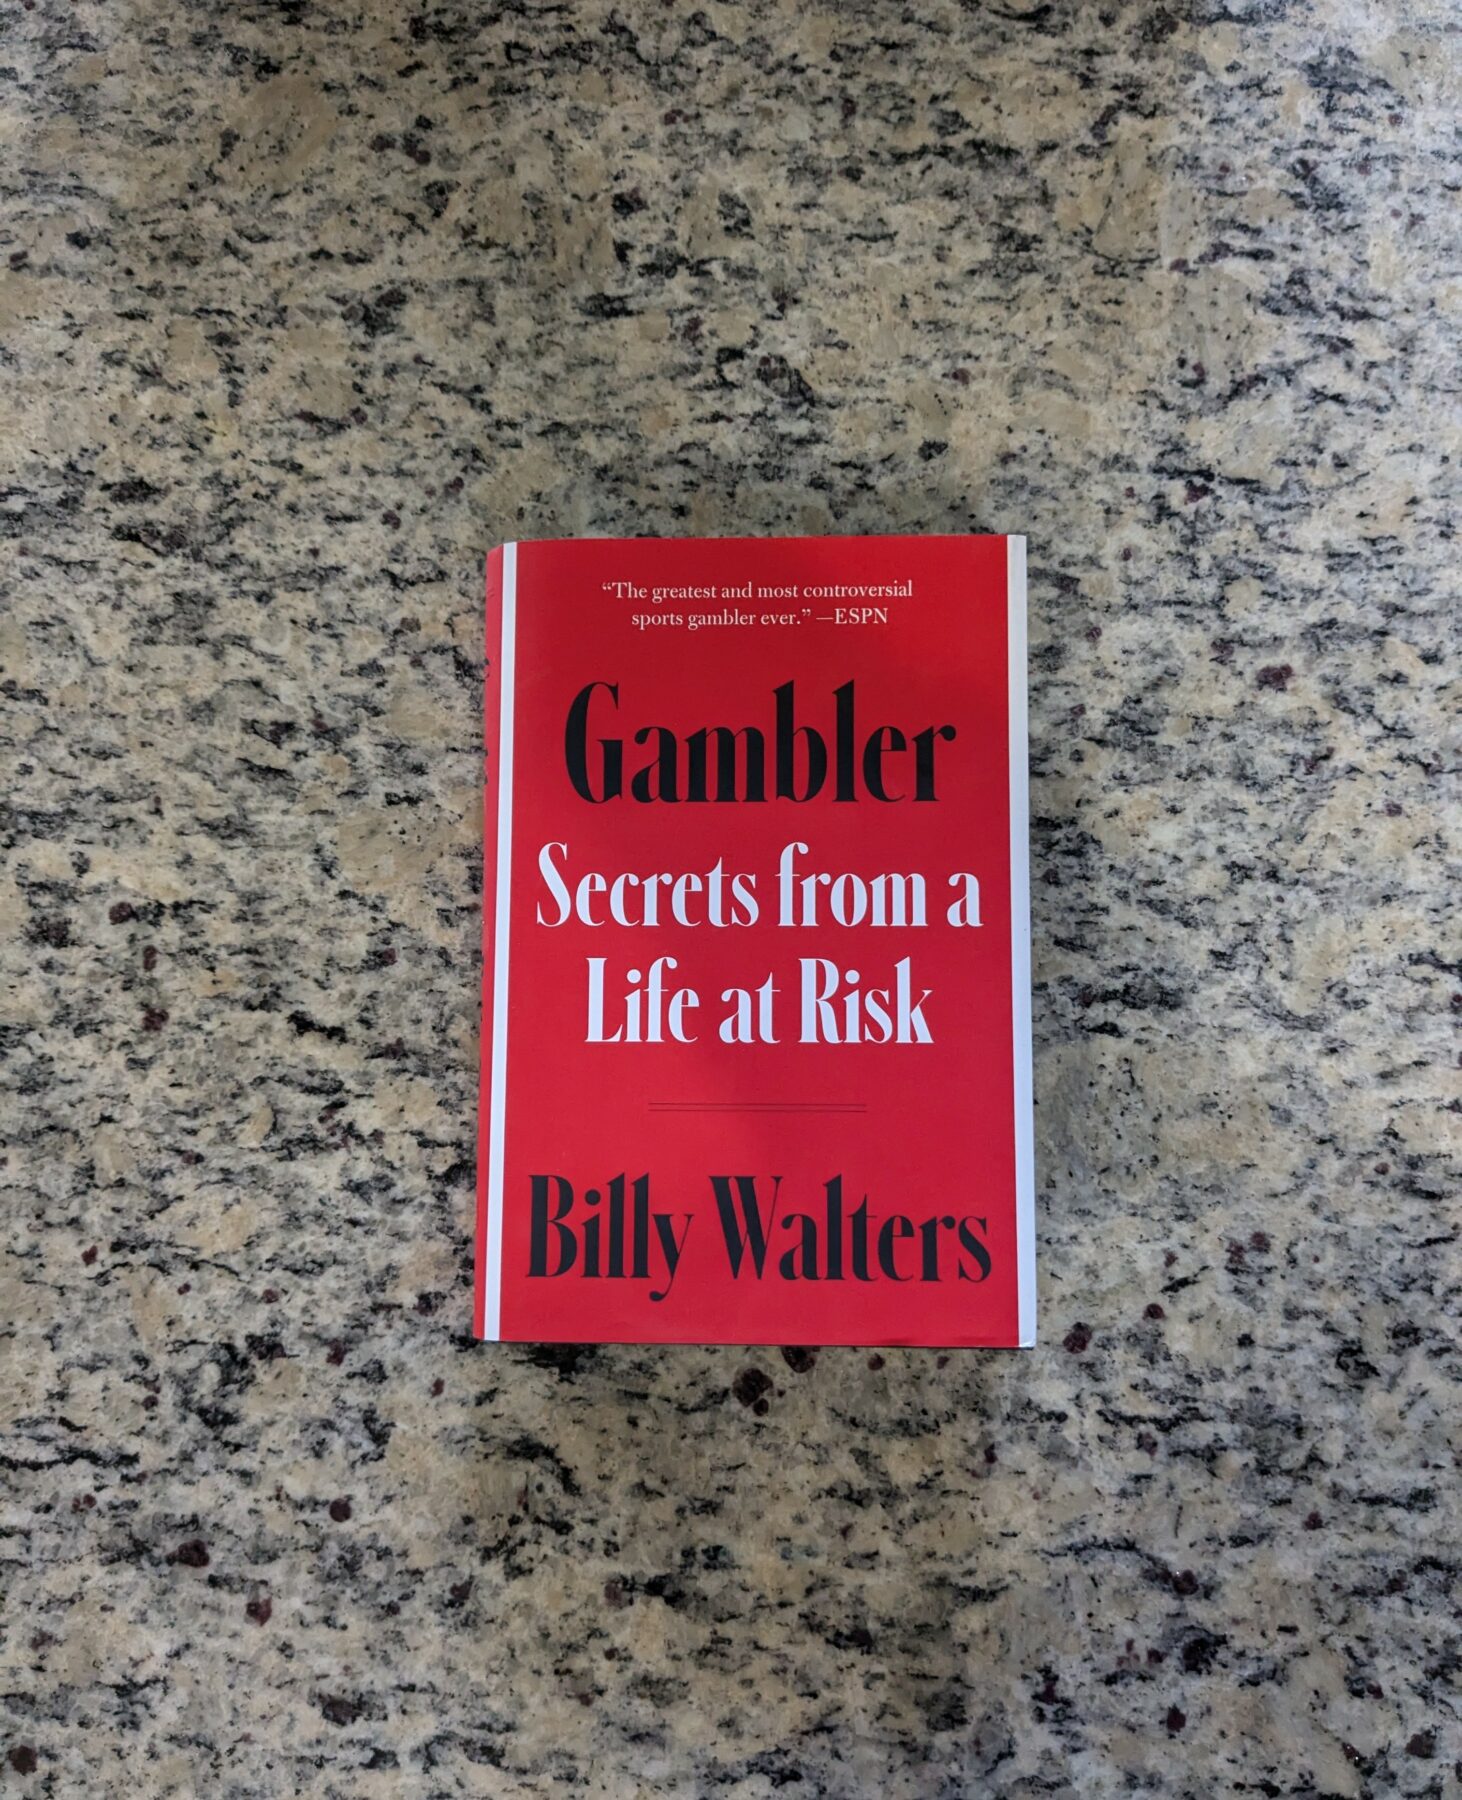 Lessons from Billy Walters' Gambler - Blog - Square Bettor